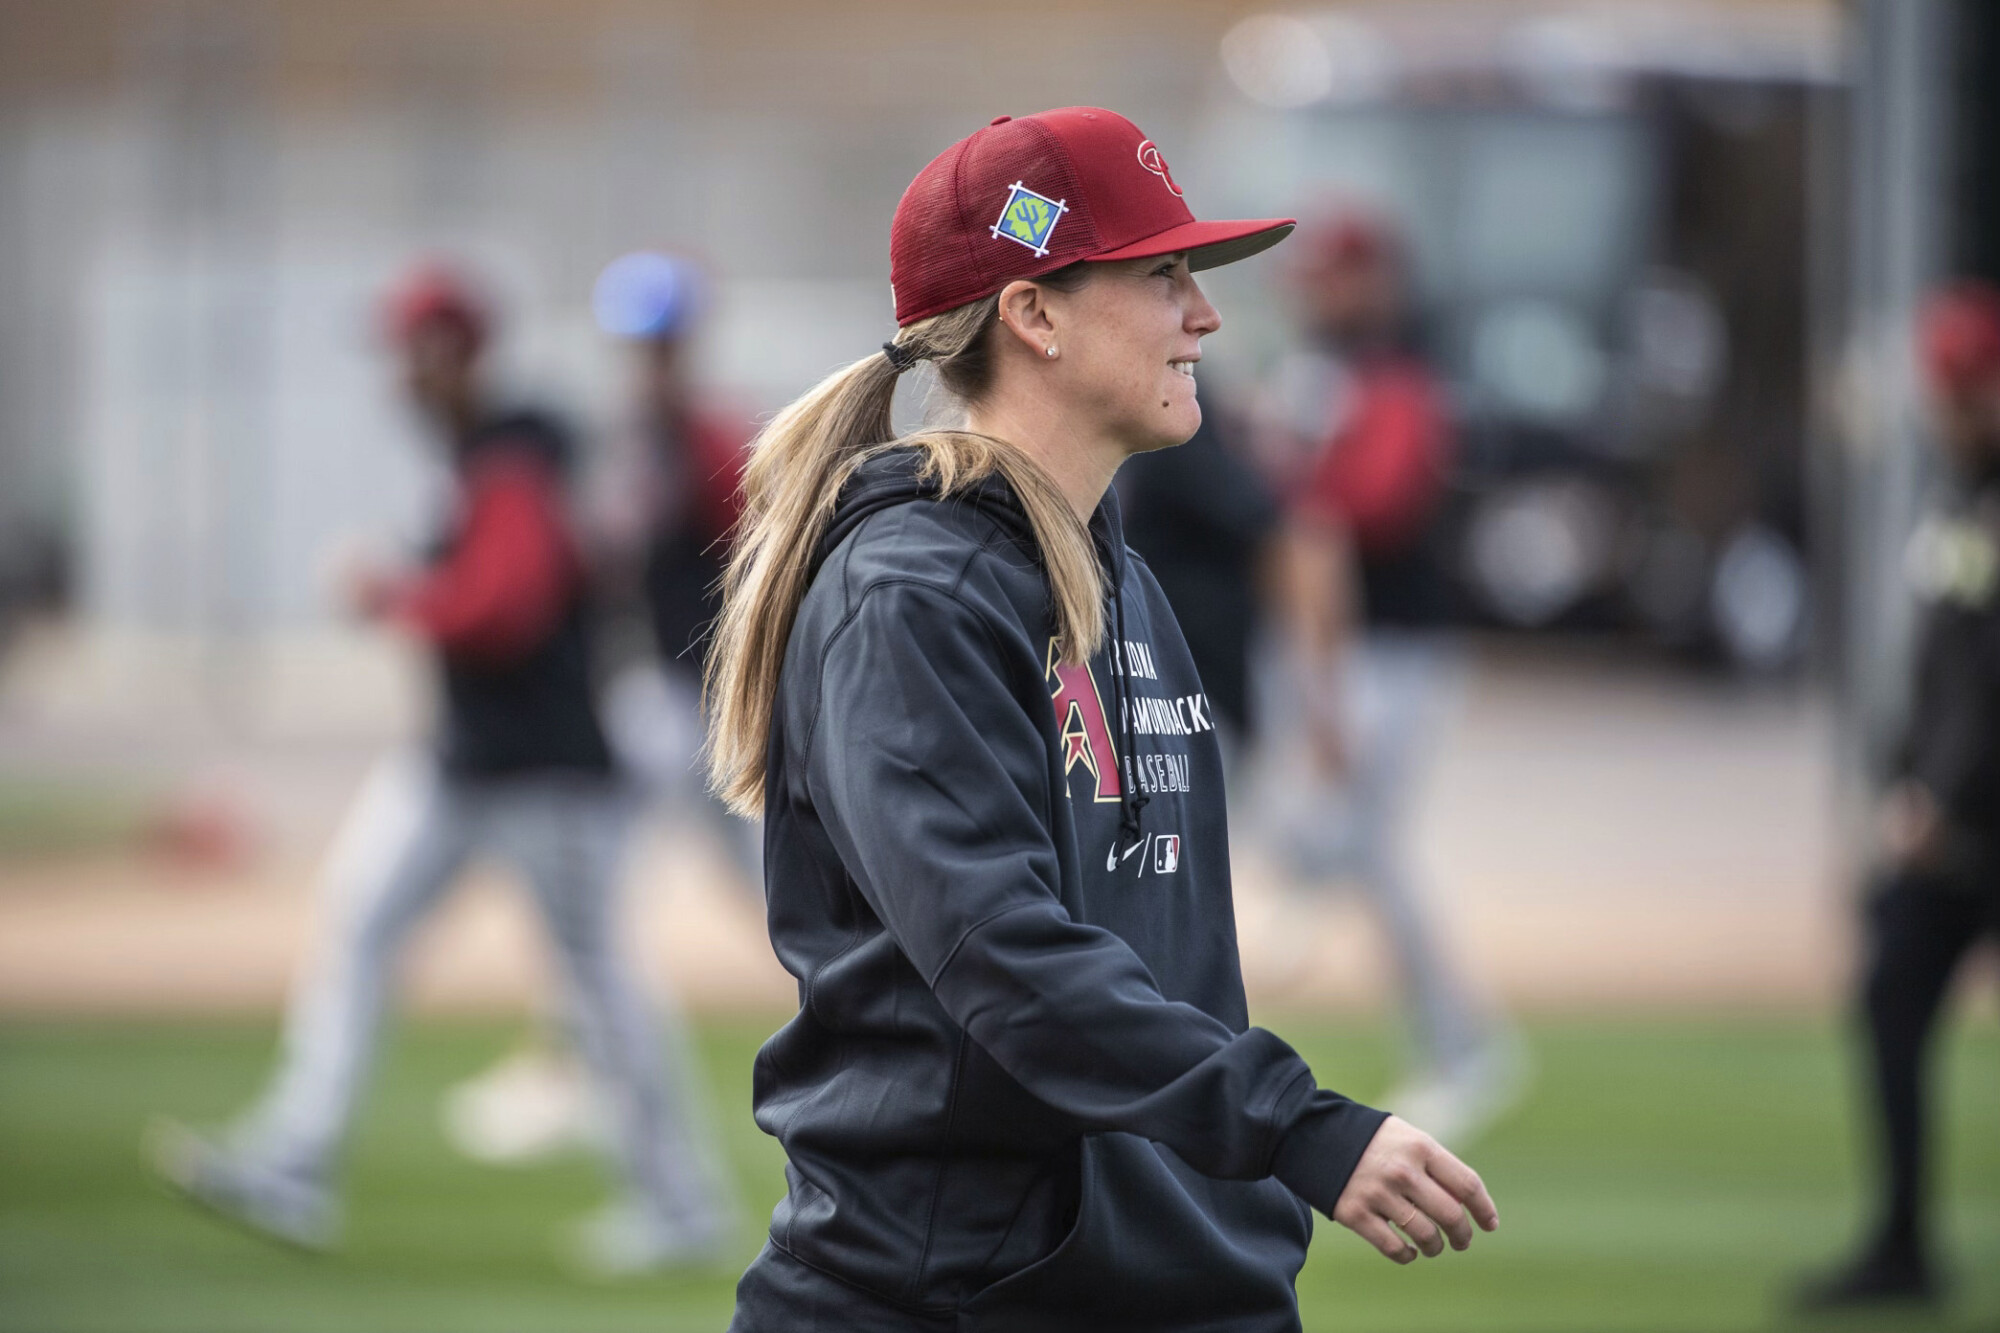 Rachel Balkovec to become first woman to manage a minor league team